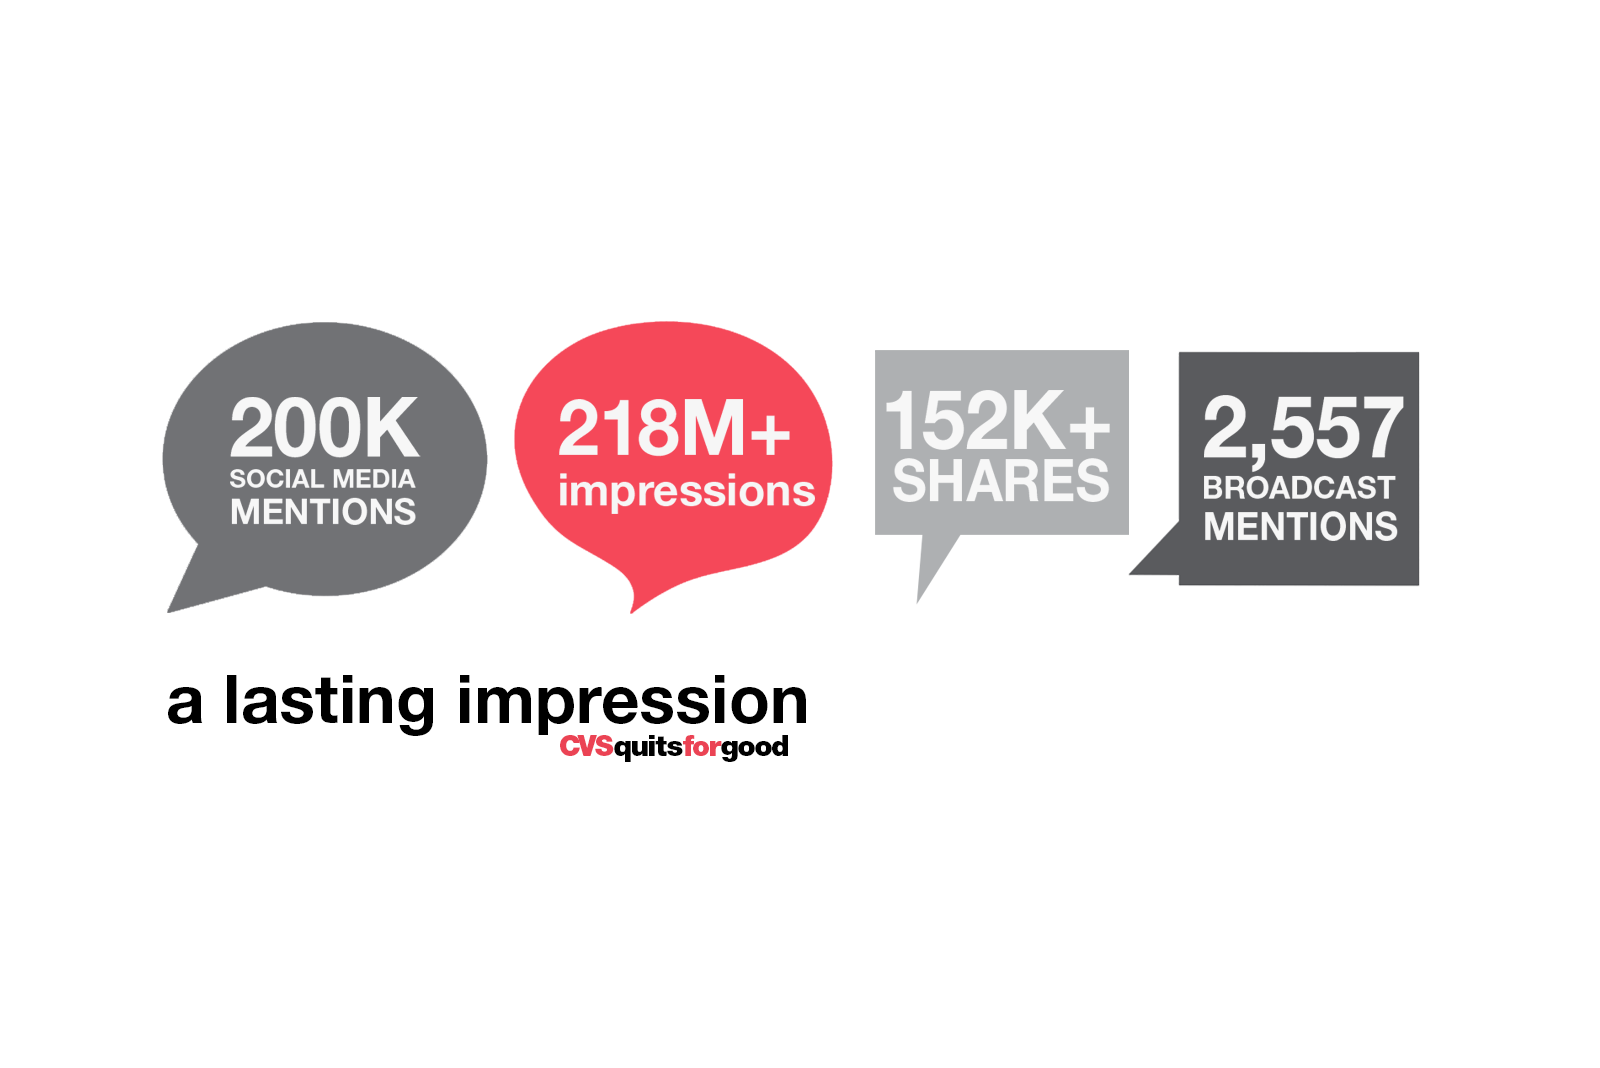 graphic stats of the social media mentions and broadcast impressions of the CVS Health quits tobacco campaign